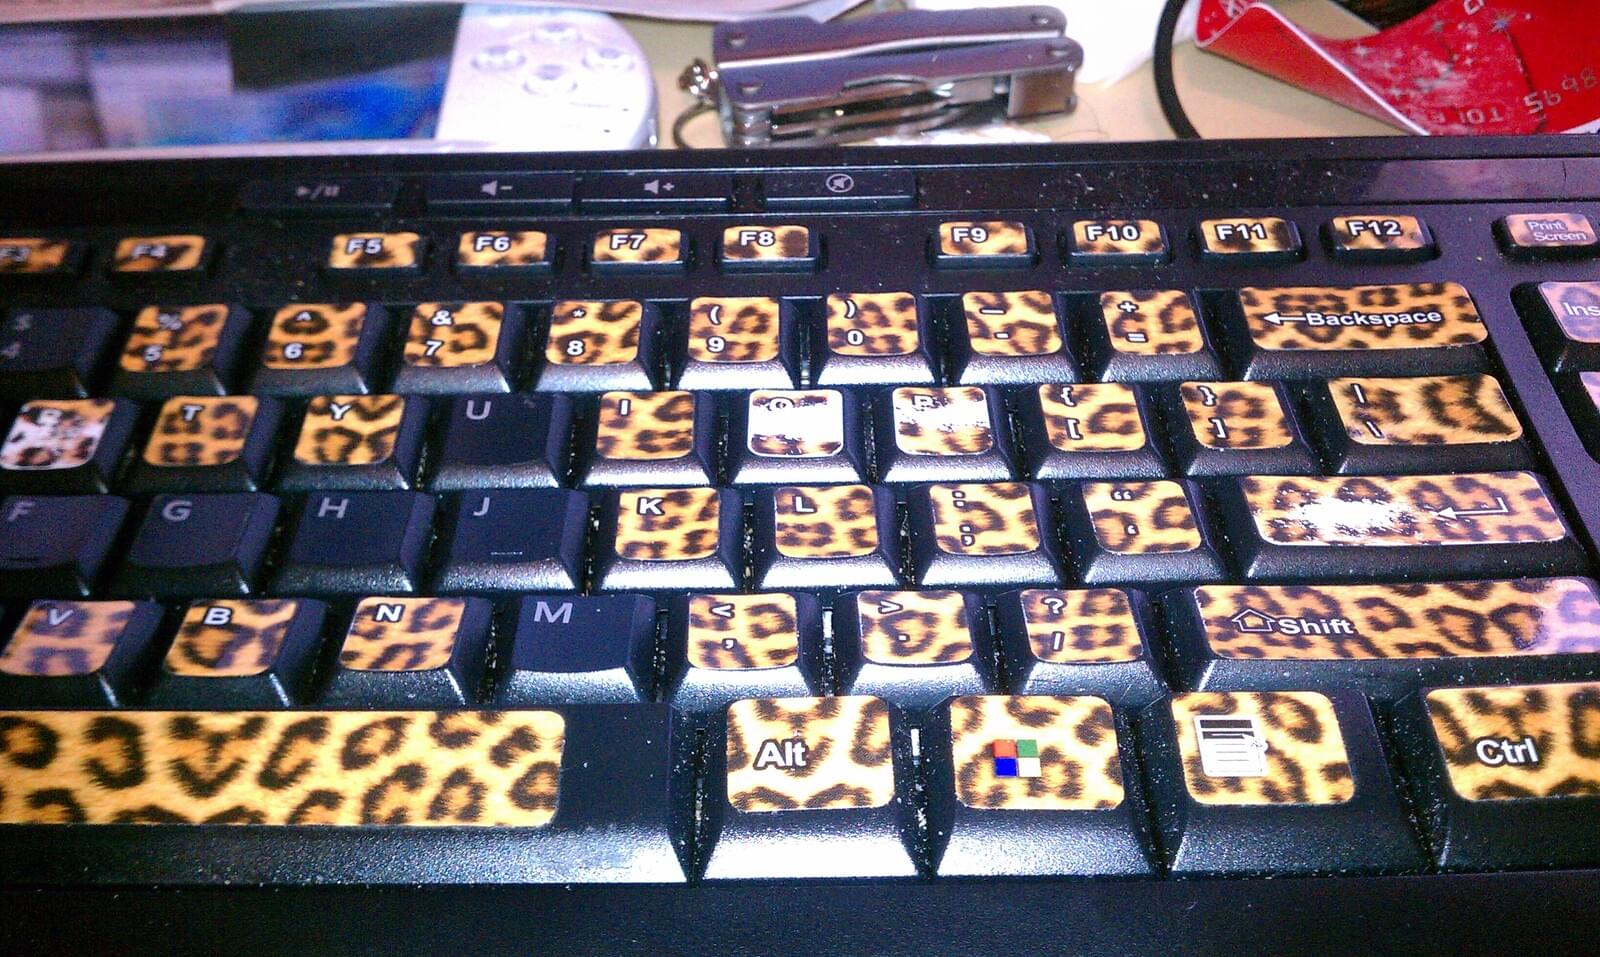 Keyboard with Leopard Print Stickers on Individual Keys